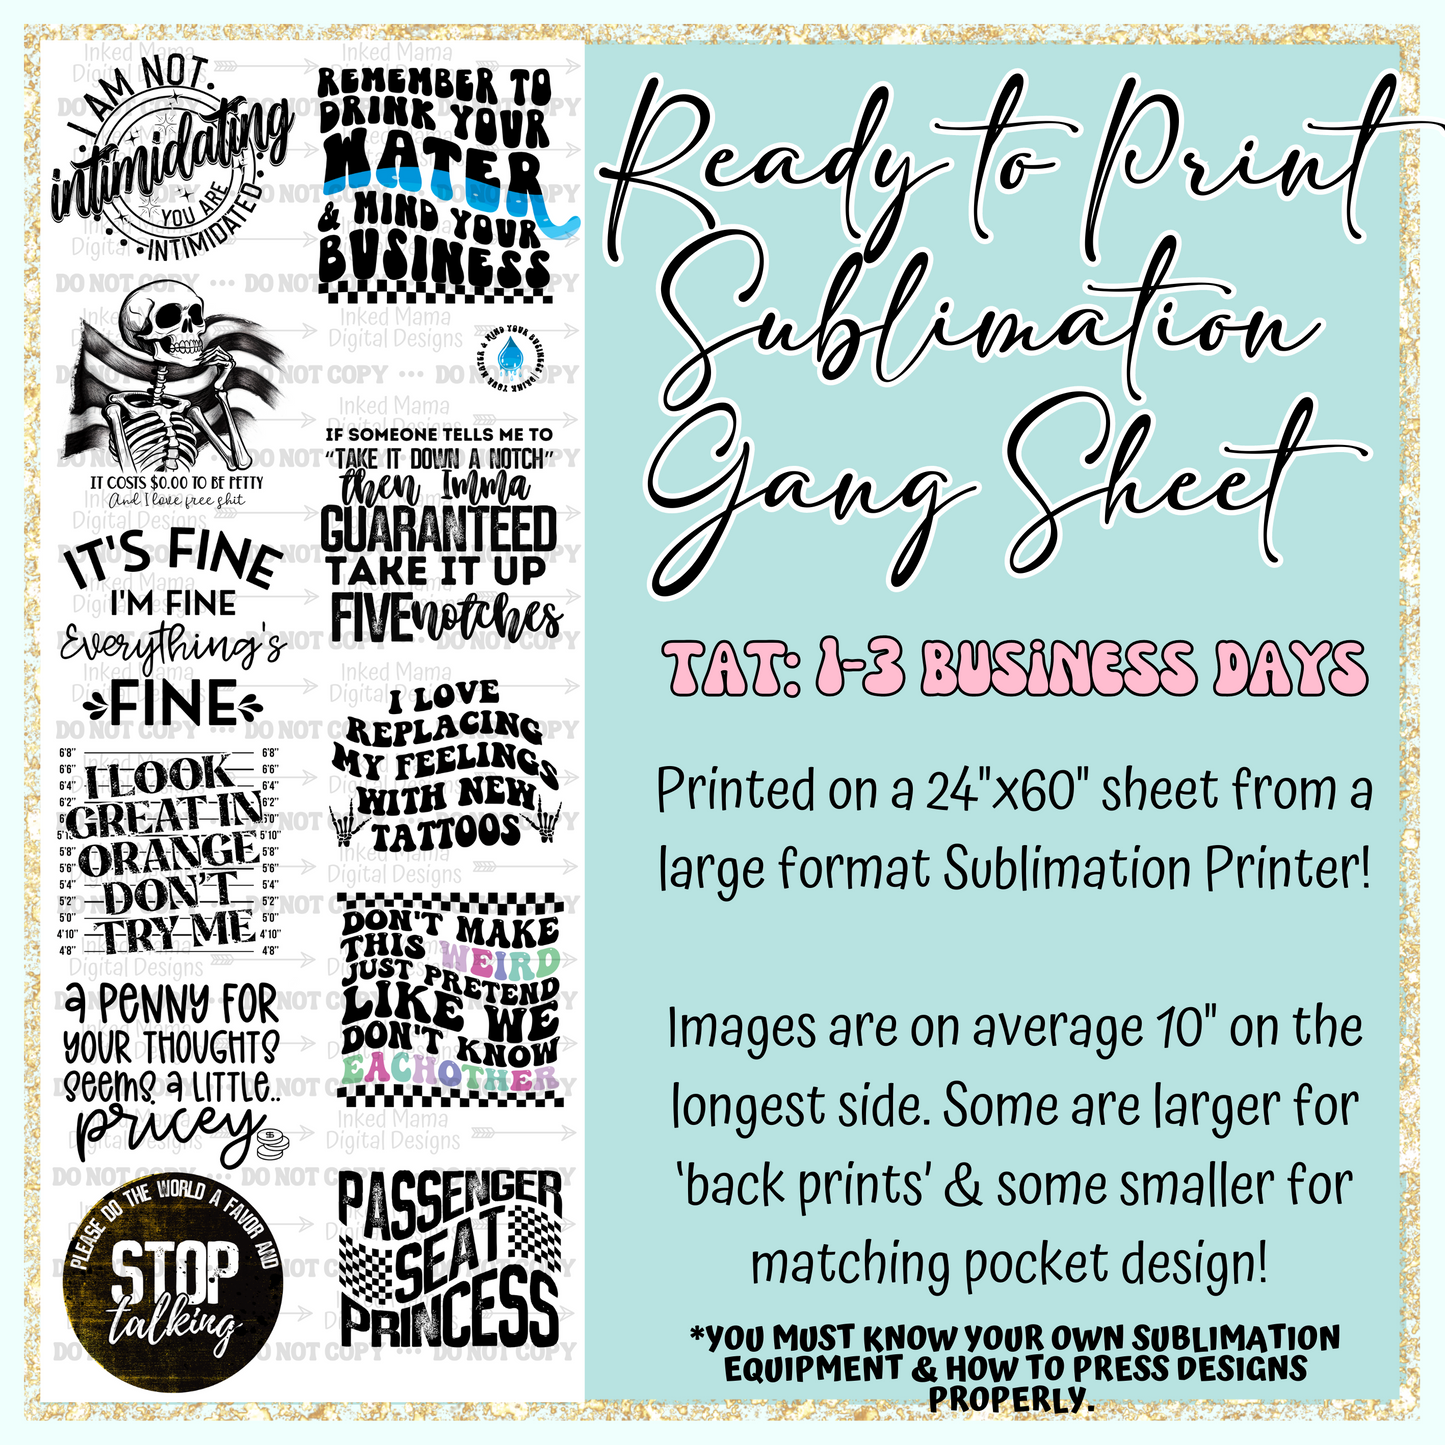 Black & White Sass Collection | Ready to Print Sublimation Gang Sheet